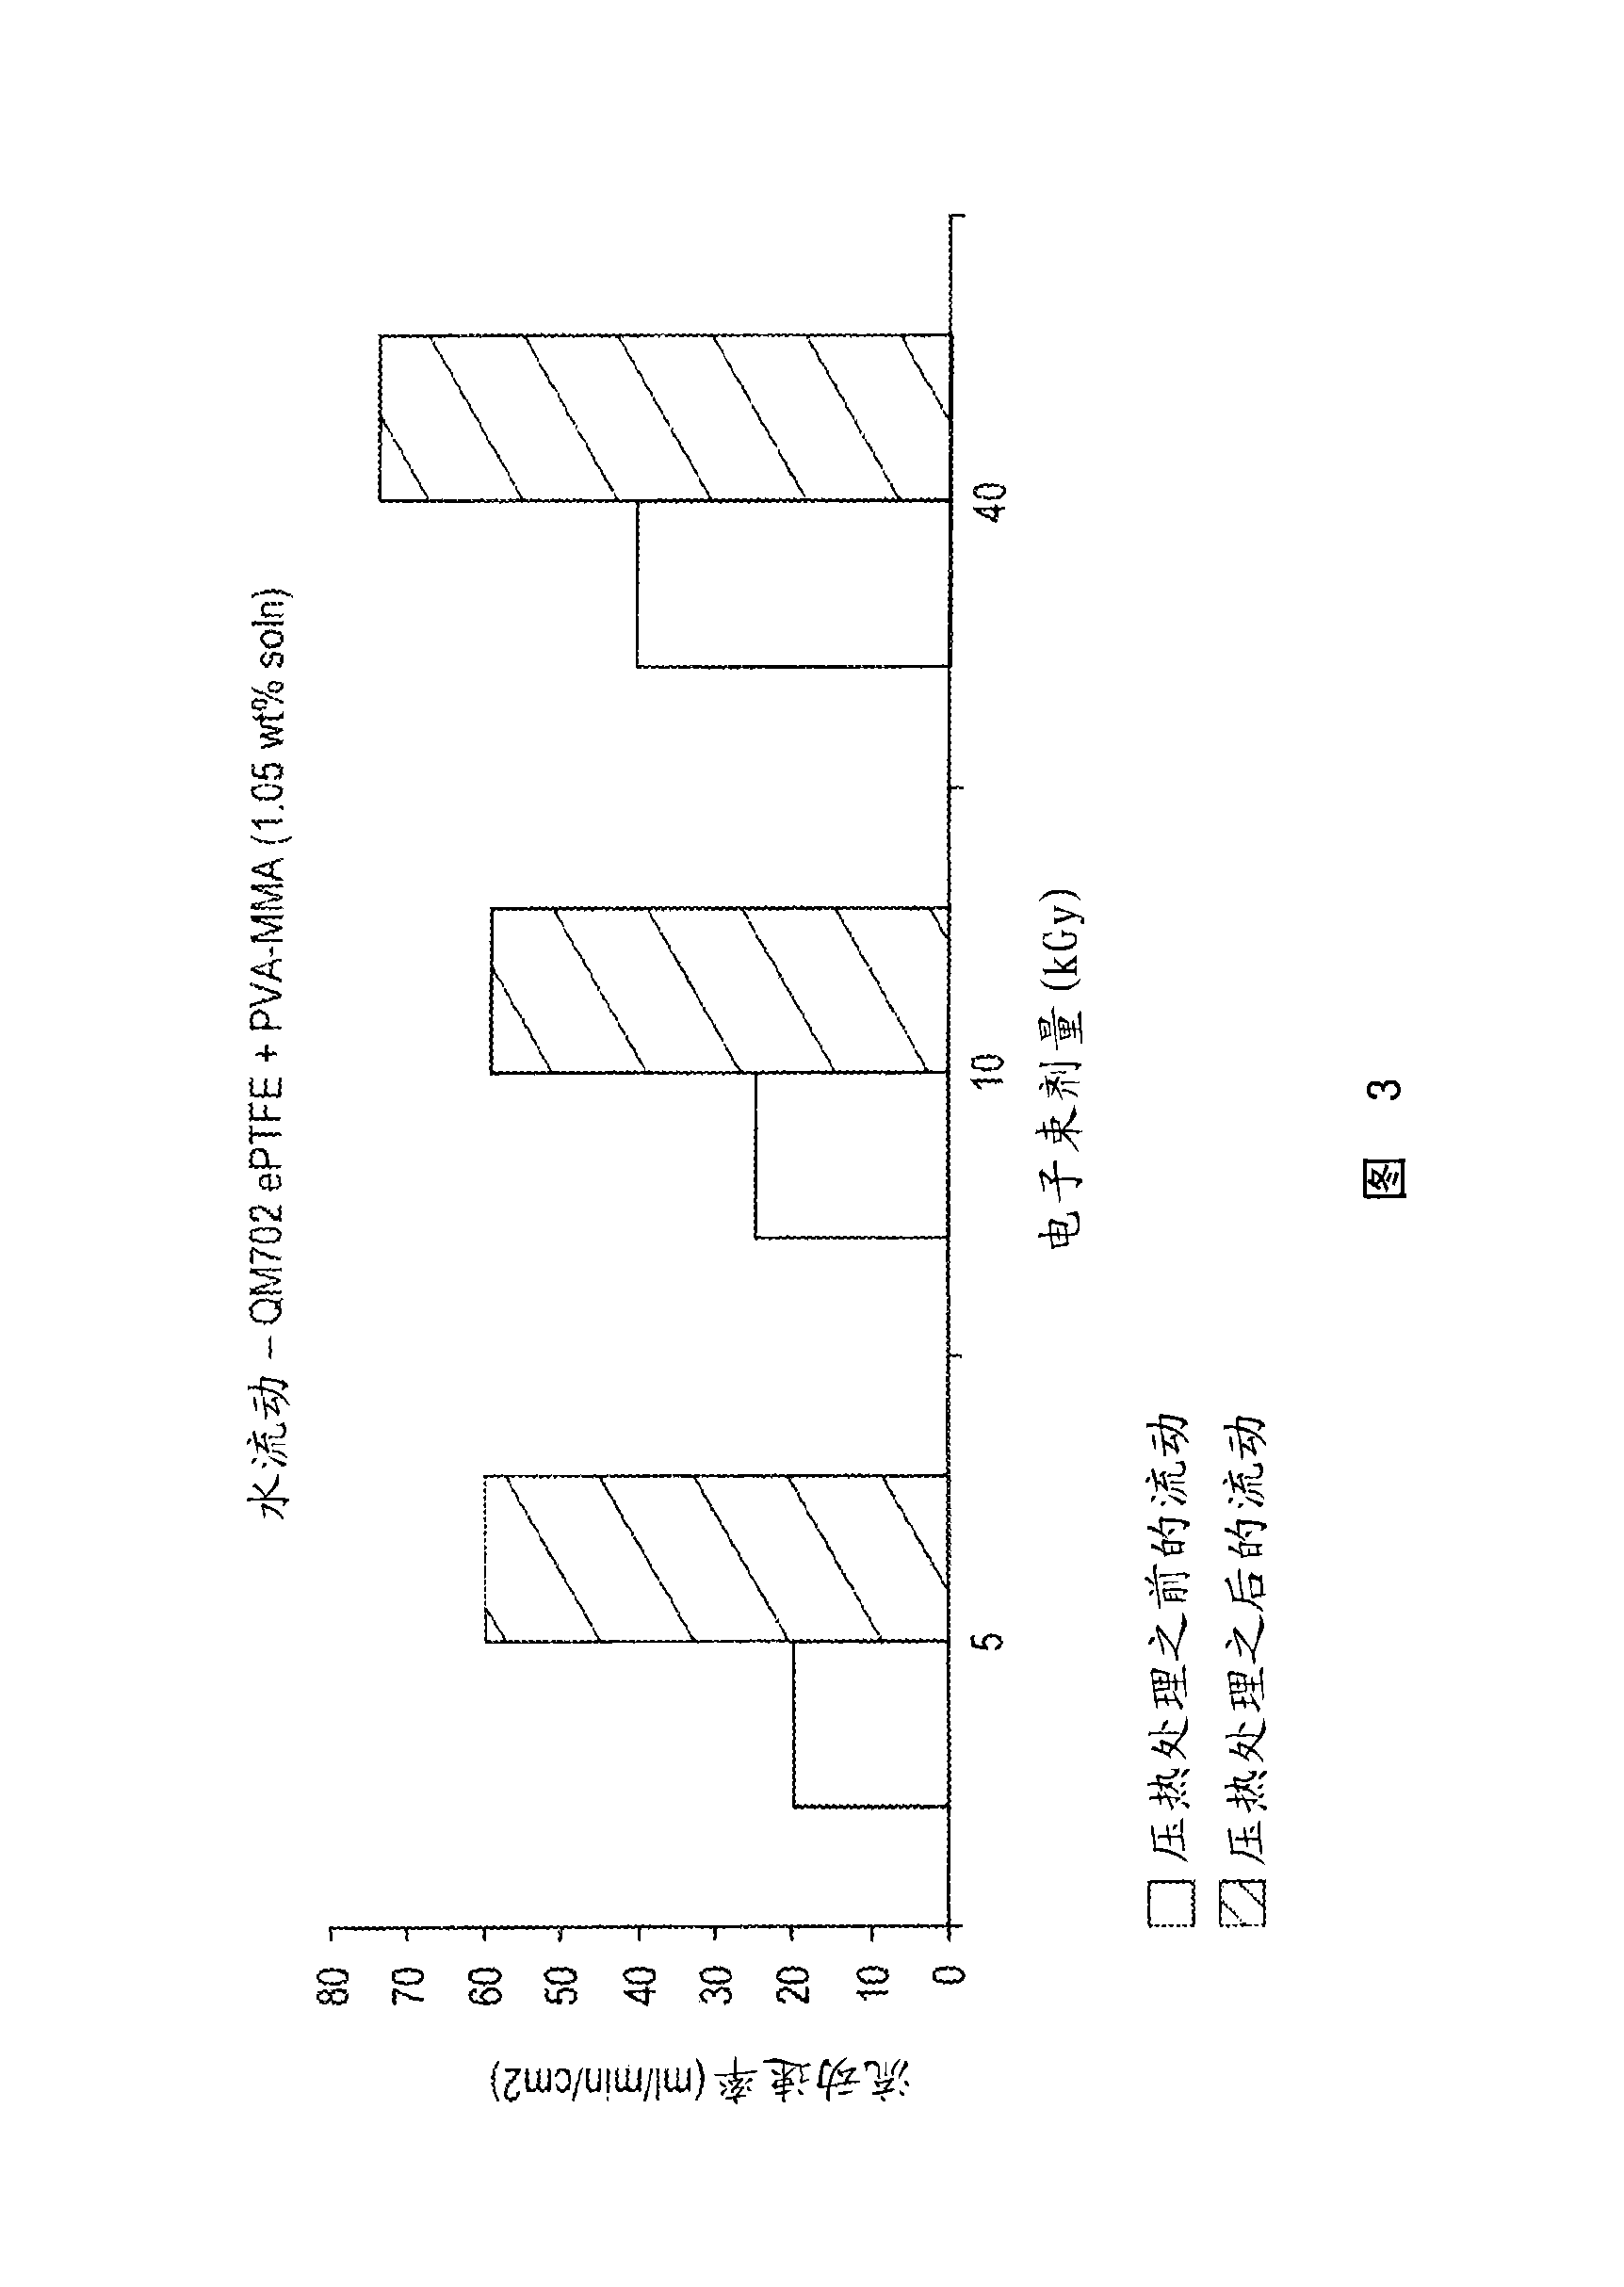 Processes for forming permanent hydrophilic porous coatings onto a substrate, and porous membranes thereof